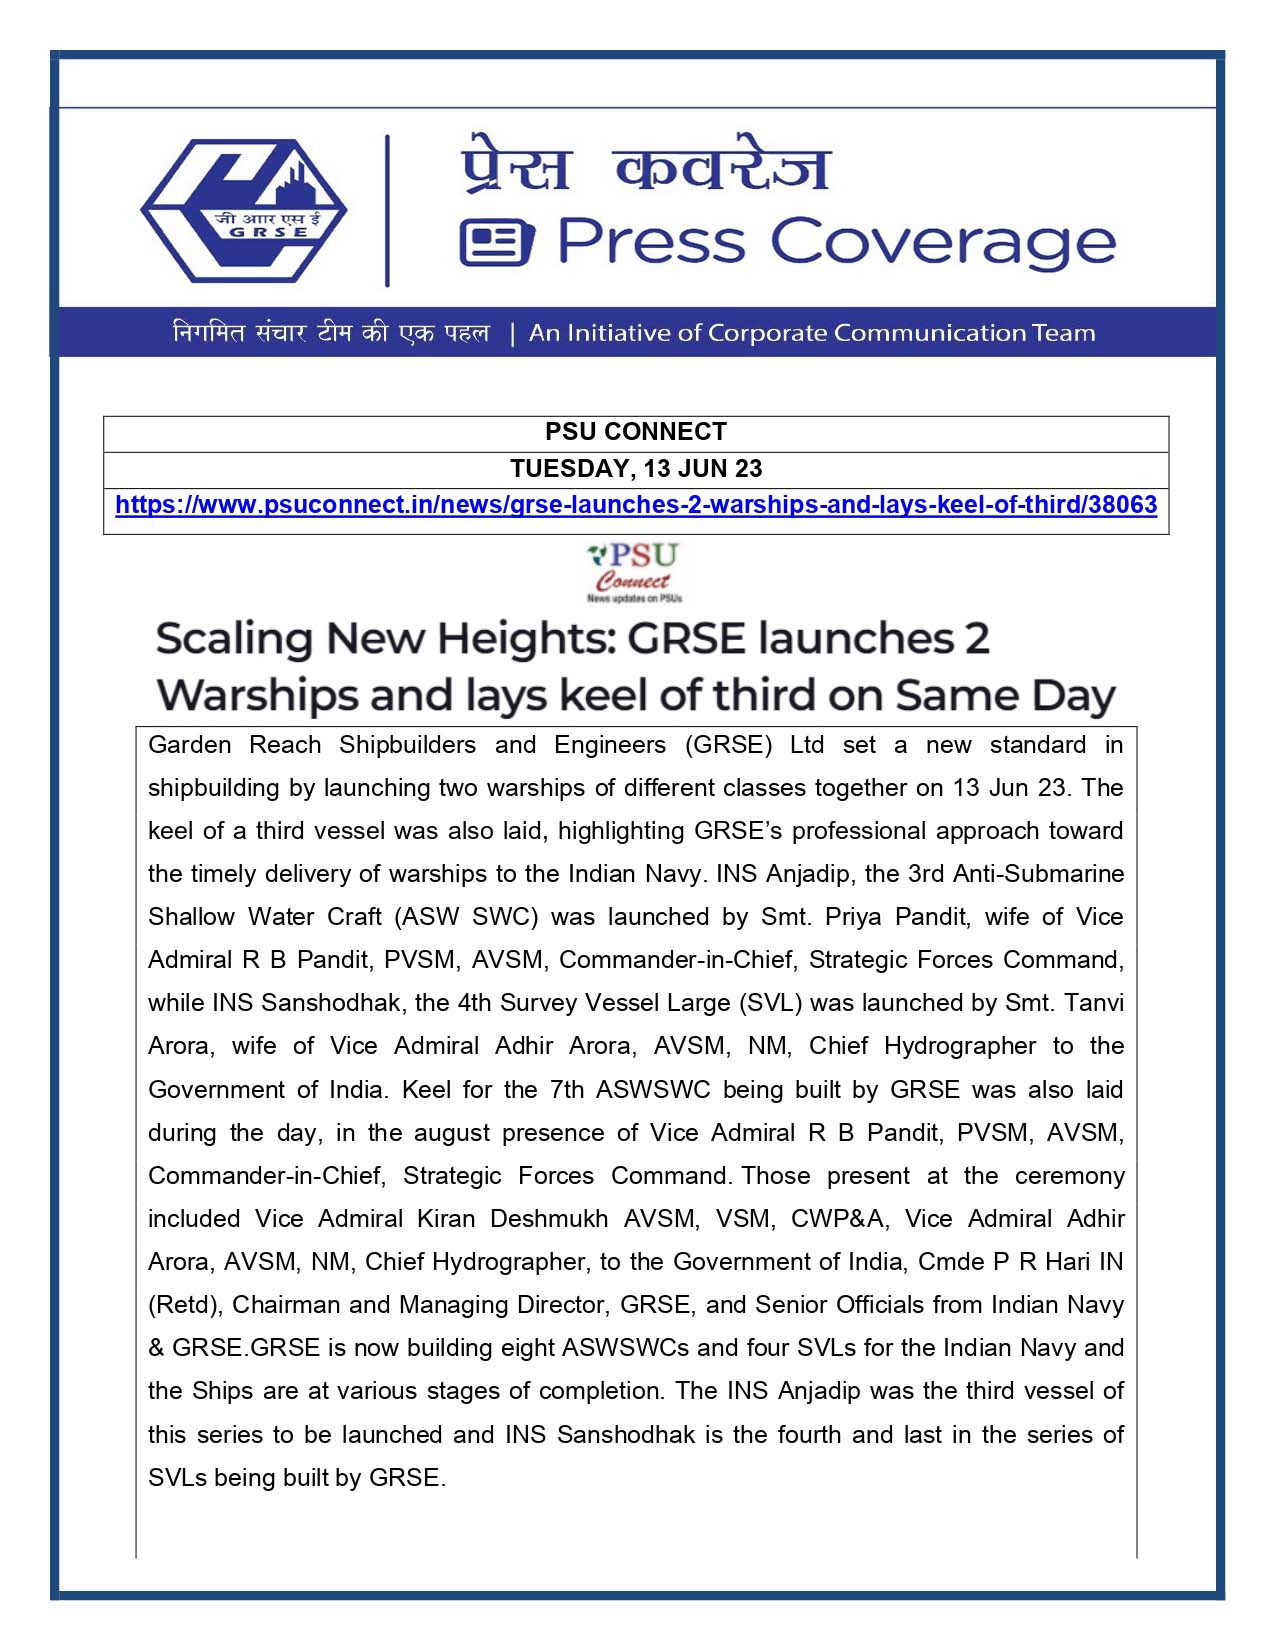 Scaling New Heights : GRSE launches 2 Warships and lays keel of third on Same Day